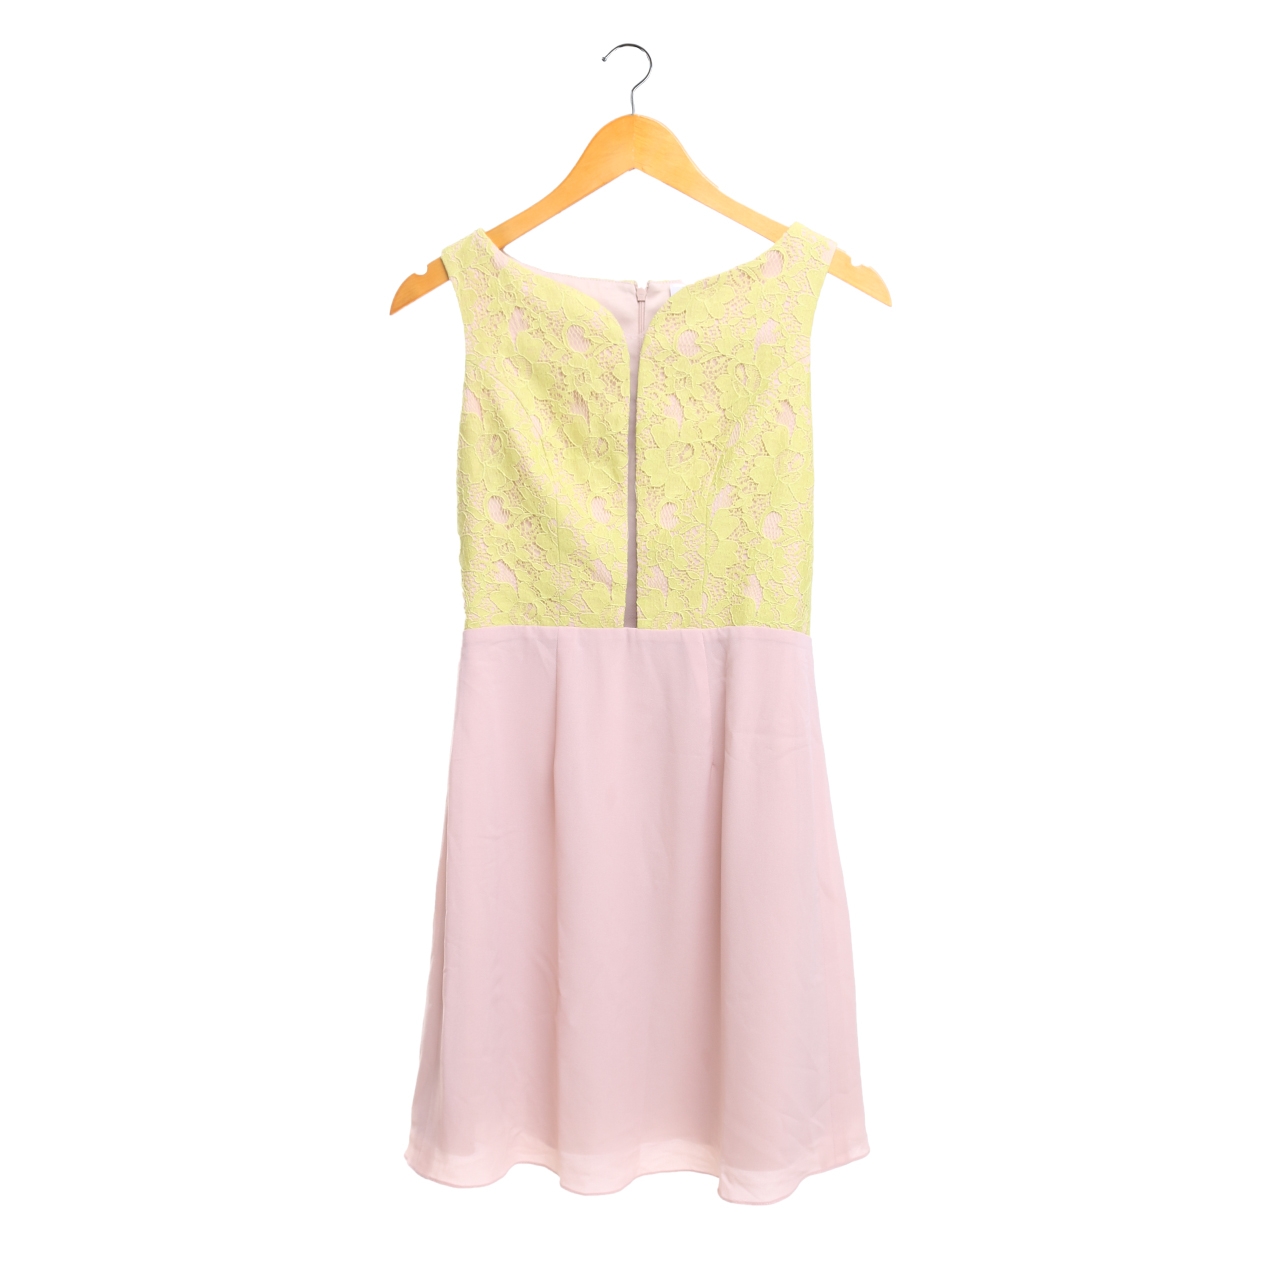 Shandy Aulia Collections Light Green And Nude Lace Summer Dresses Mini Dress